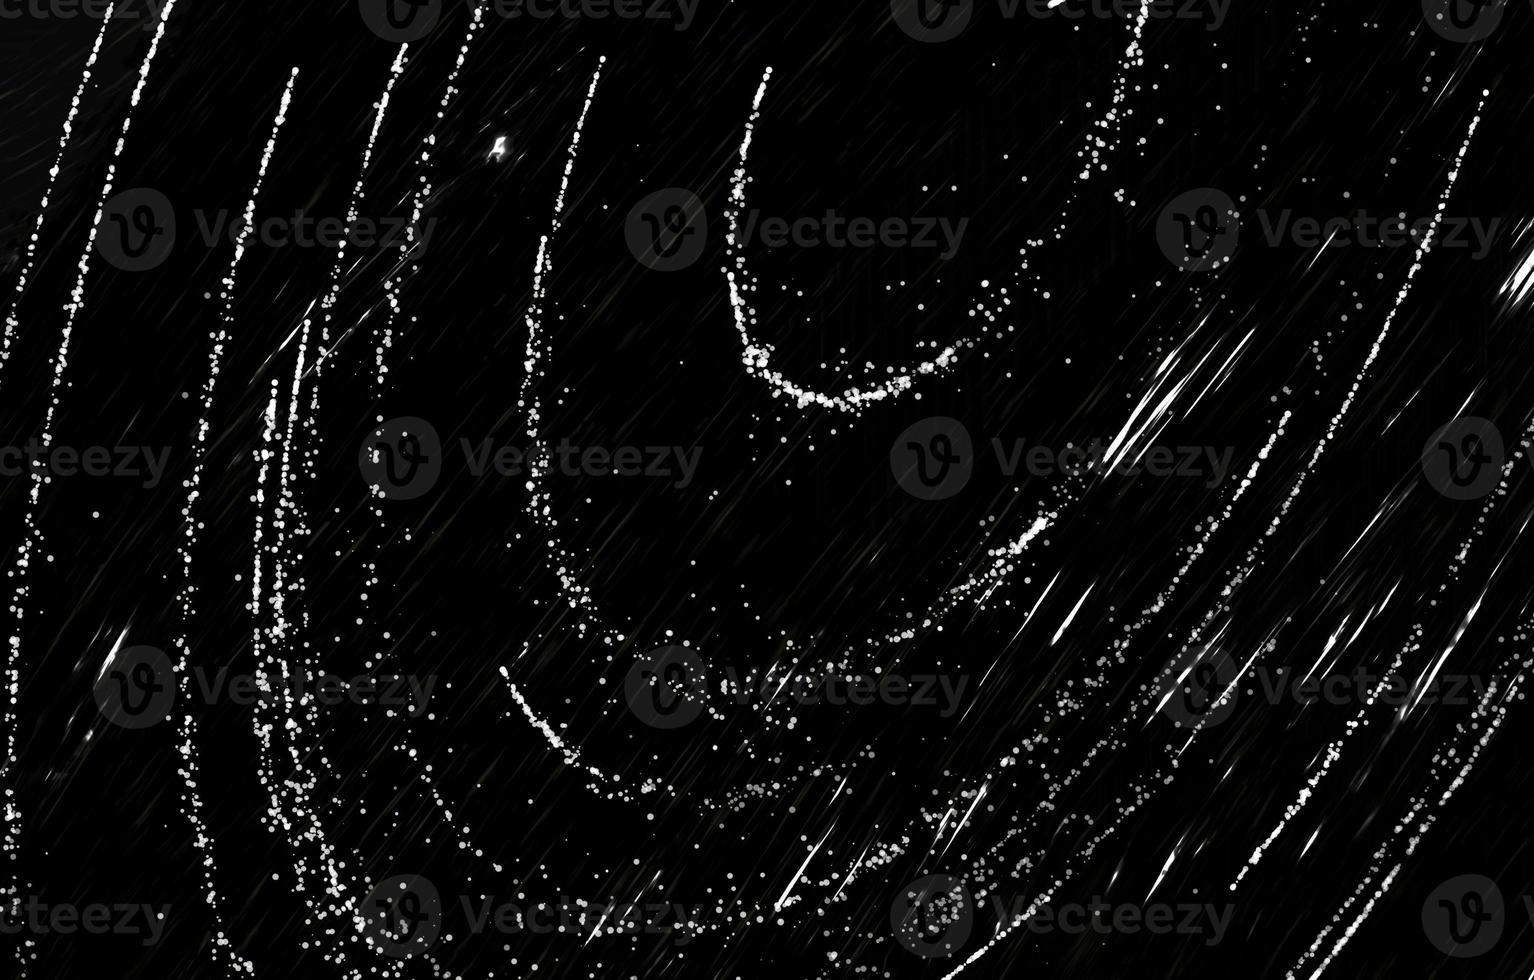 Monochrome particles abstract texture.Overlay illustration over any design to create grungy vintage effect and depth. photo